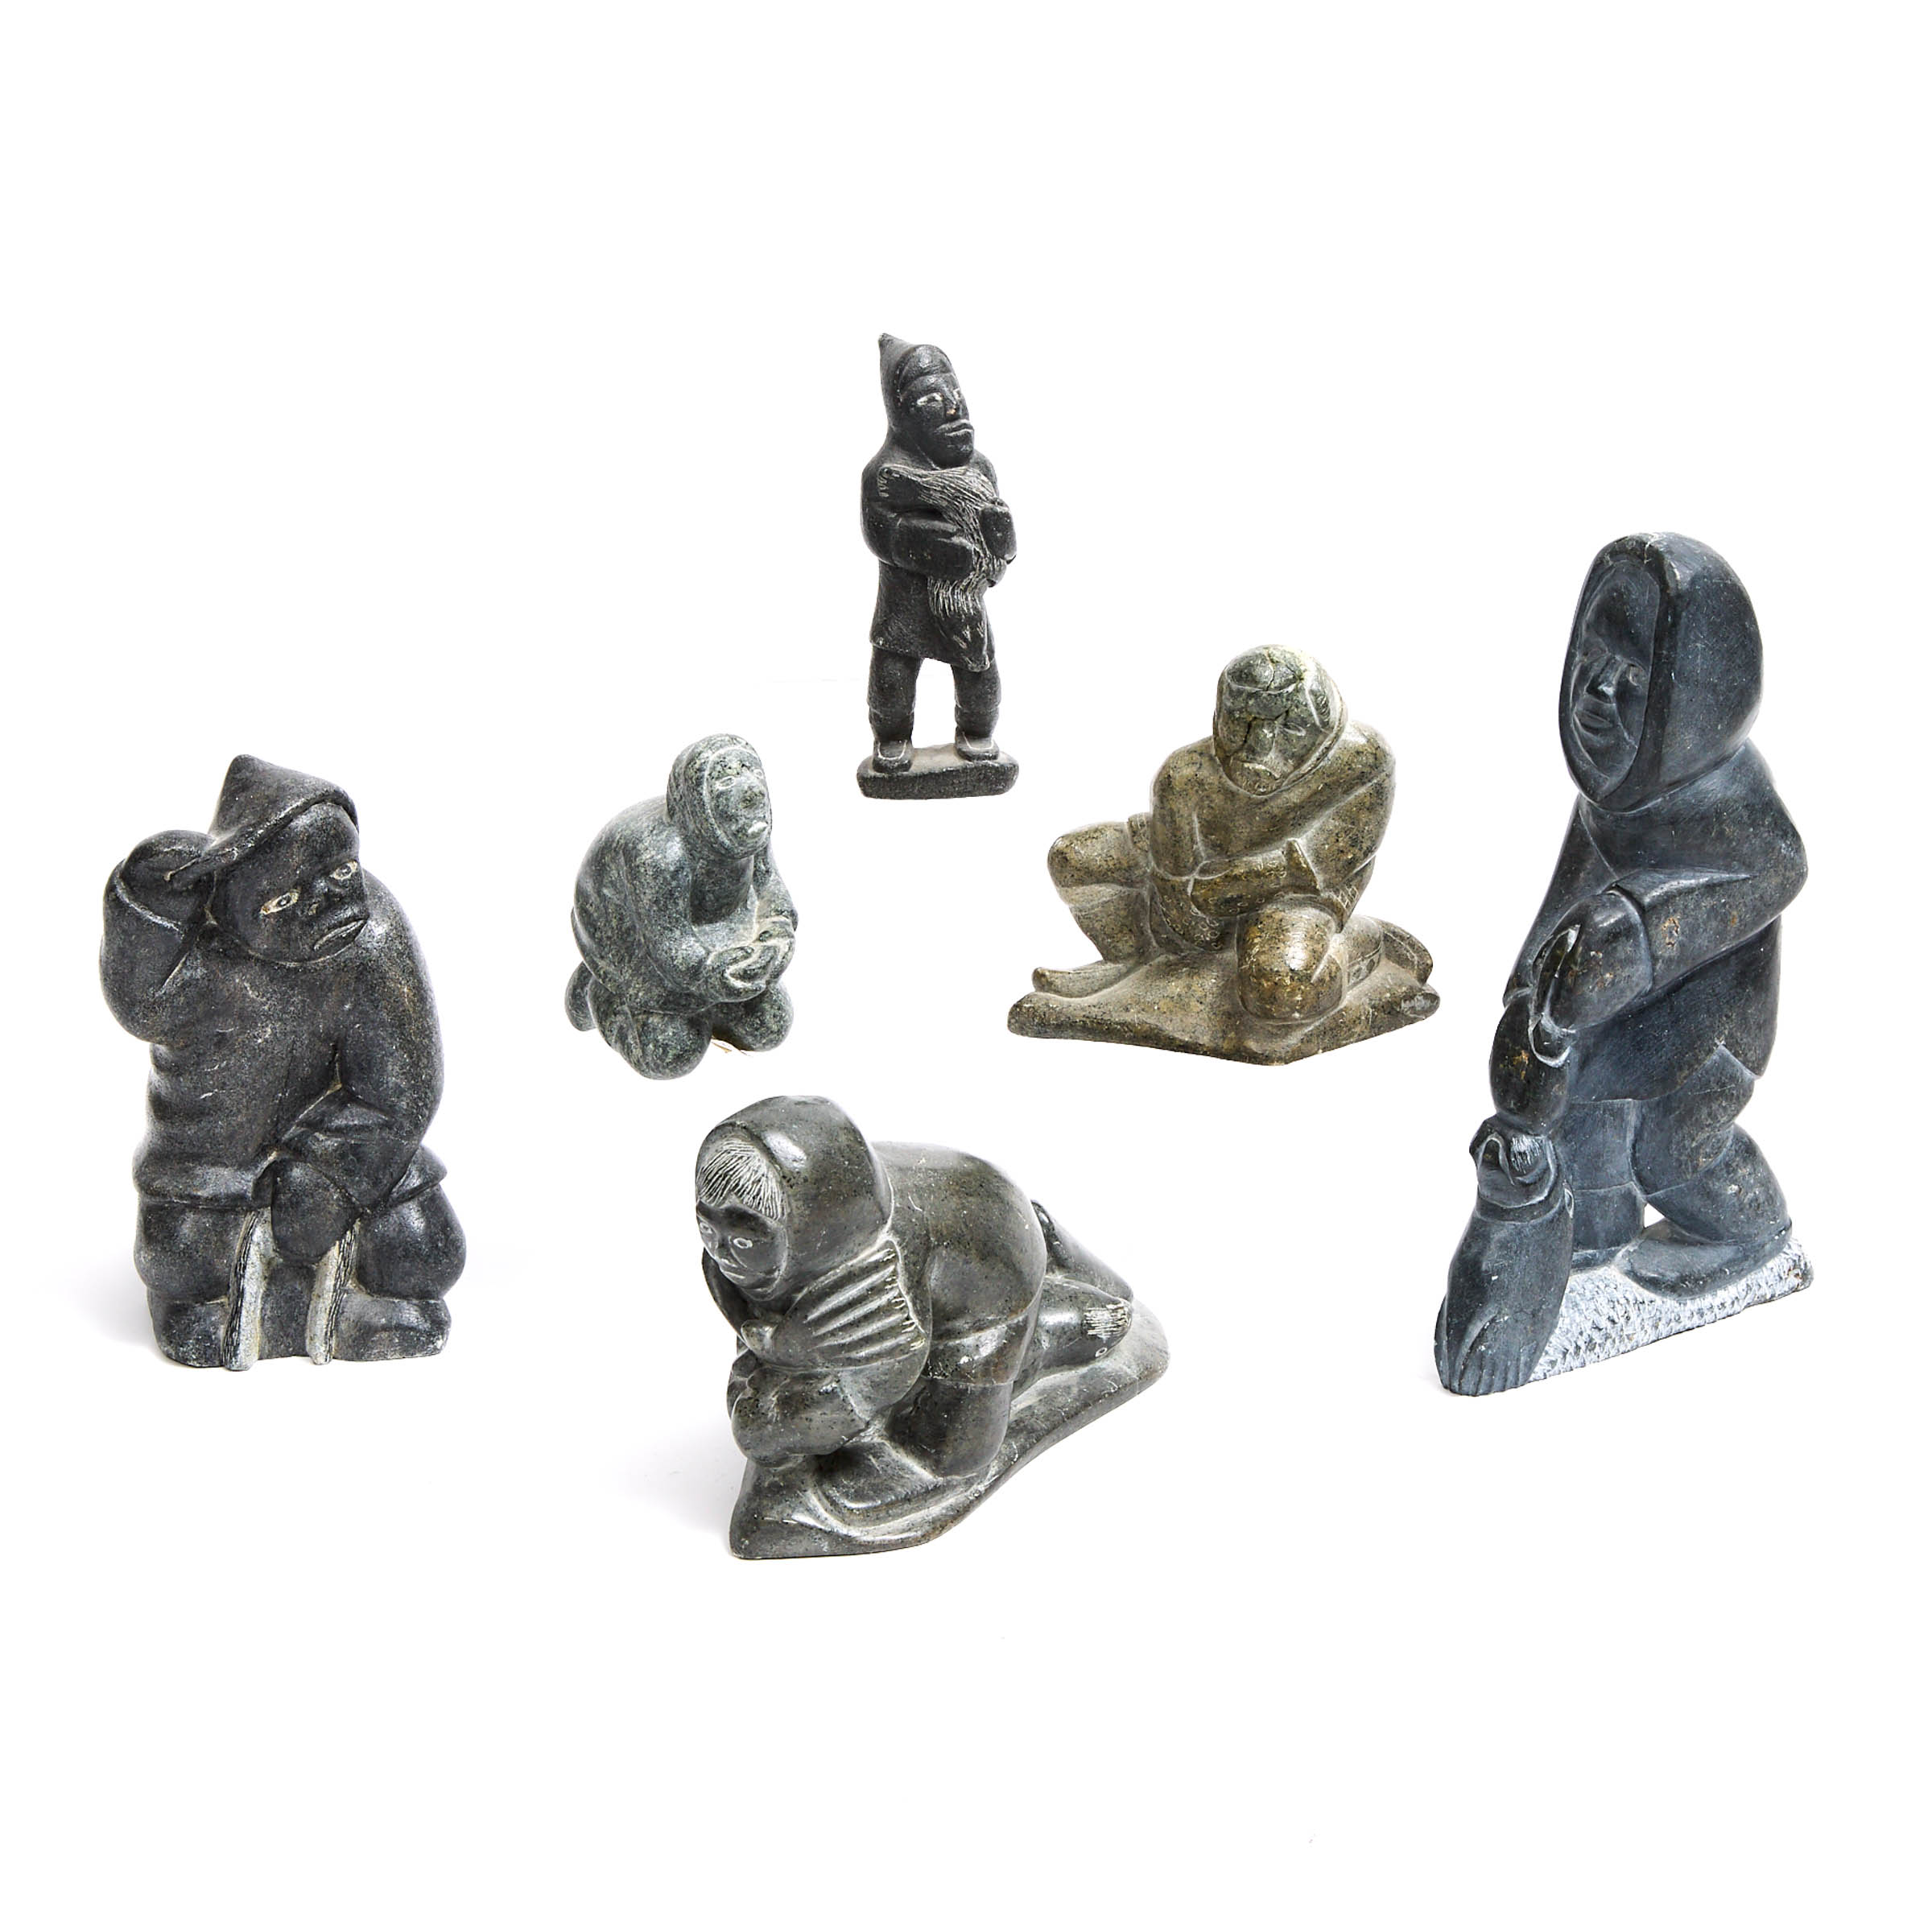 A COLLECTION OF SIX INUIT CARVINGS OF HUNTERS